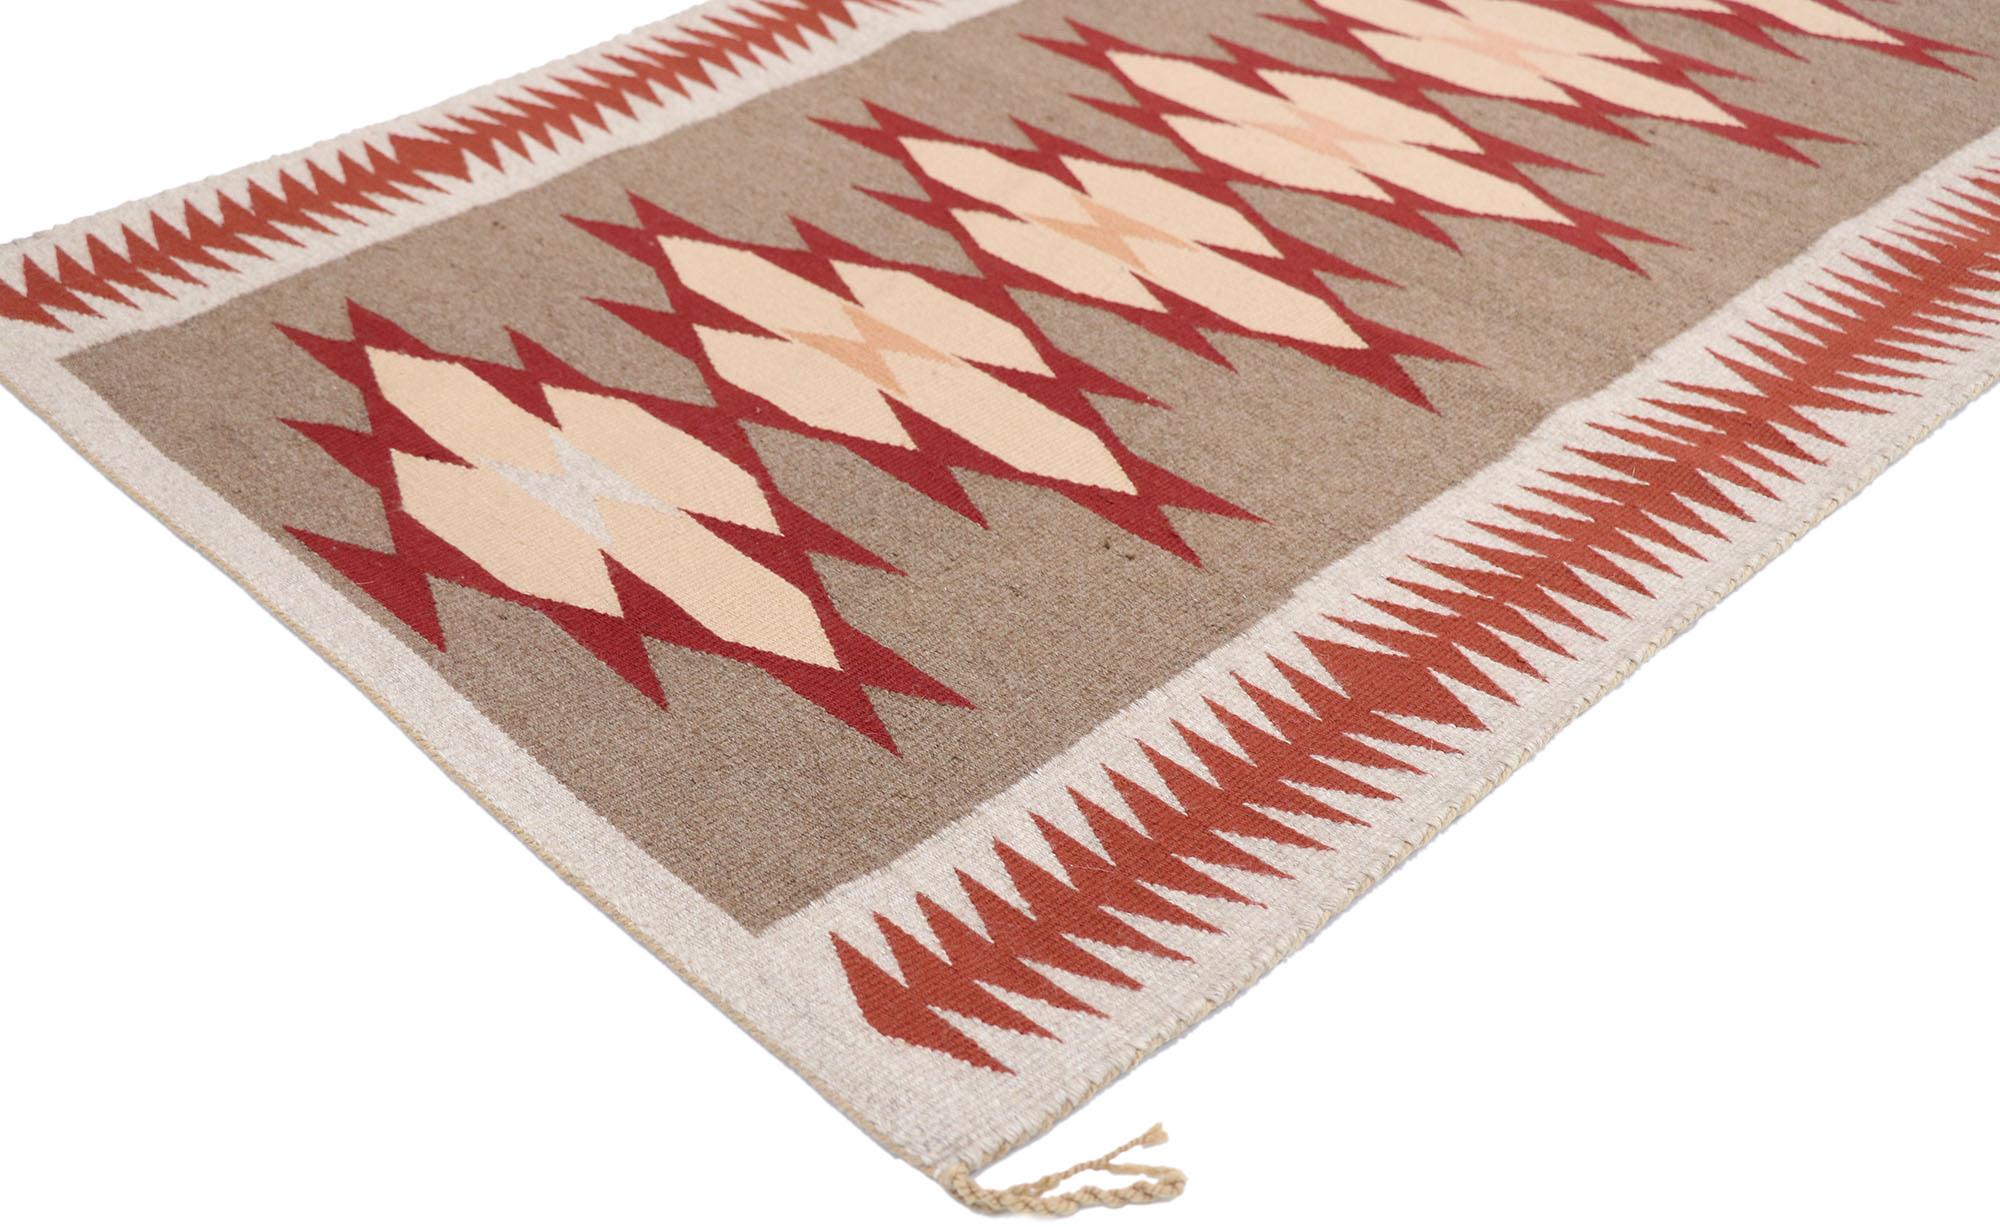 77867 Vintage Navajo Eye Dazzler Rug, 02'09 x 03'11. Eye Dazzler Navajo rugs are intricate textiles crafted by the Navajo people of the Southwestern United States, characterized by their vibrant colors and mesmerizing geometric patterns. Originating